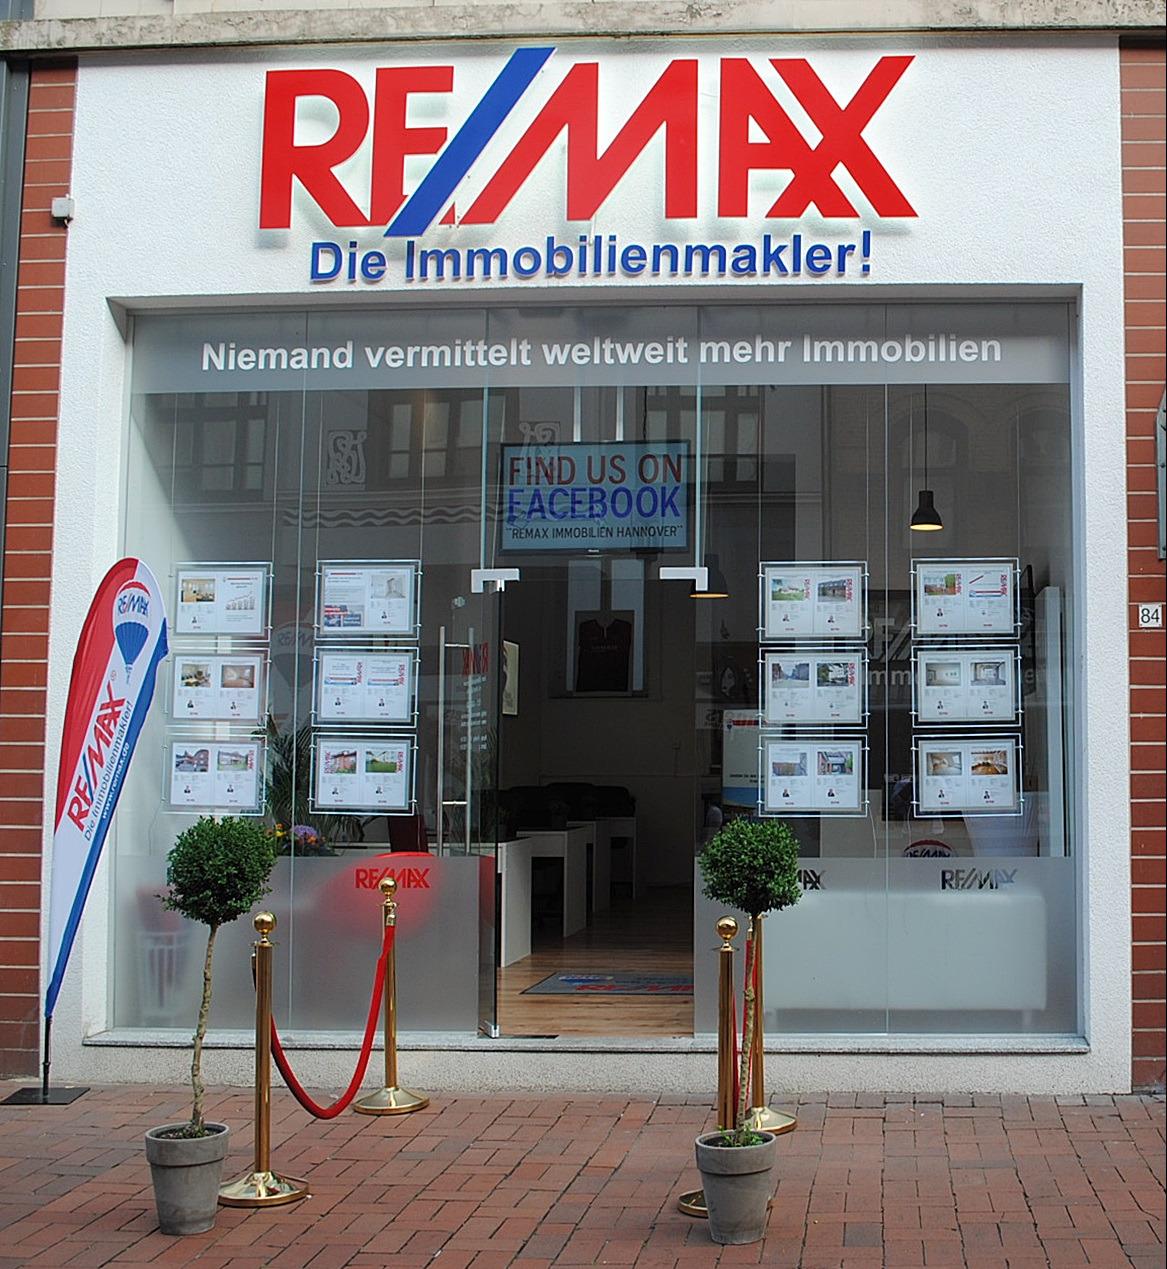 RE/MAX Immobilienmakler in Hannover, Lister Meile 84 in Hannover